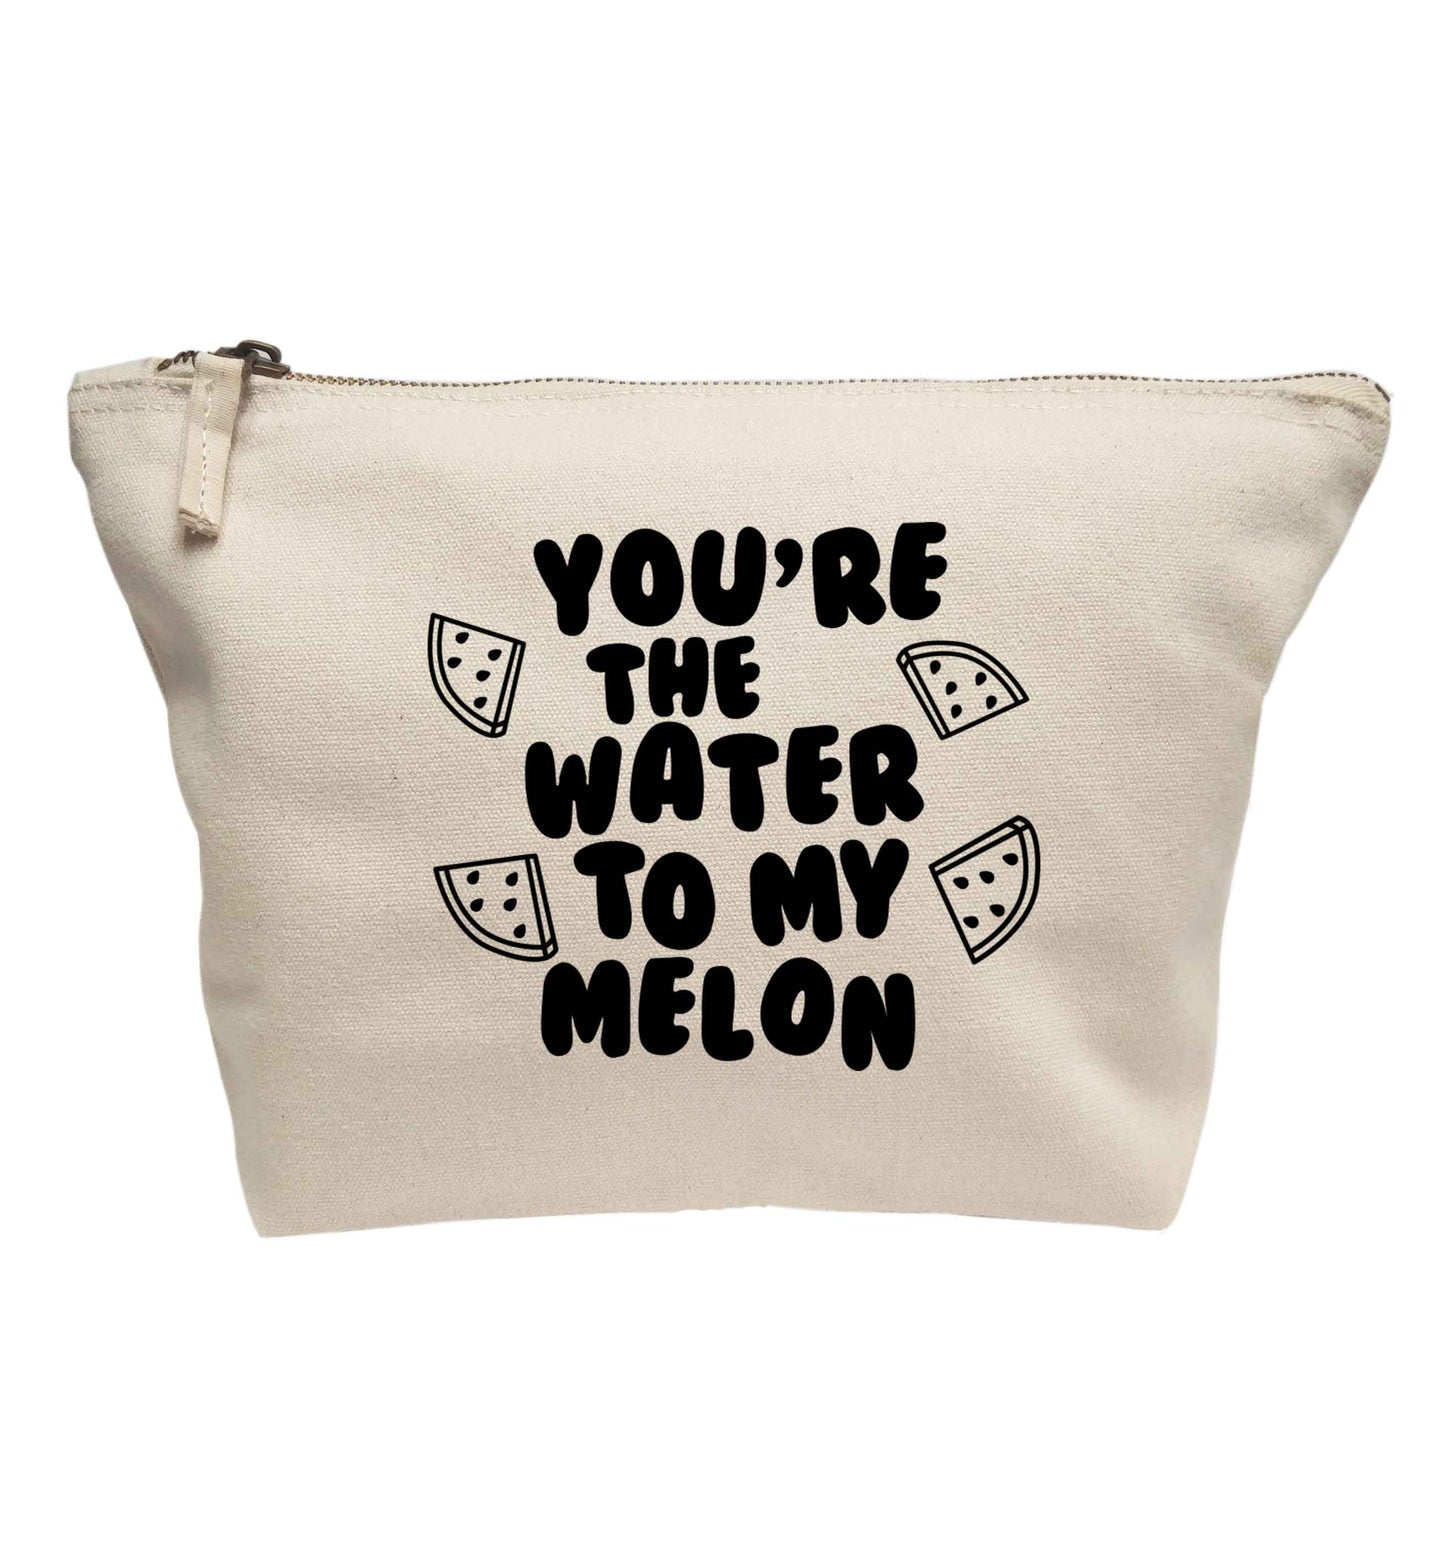 You're the water to my melon | Makeup / wash bag